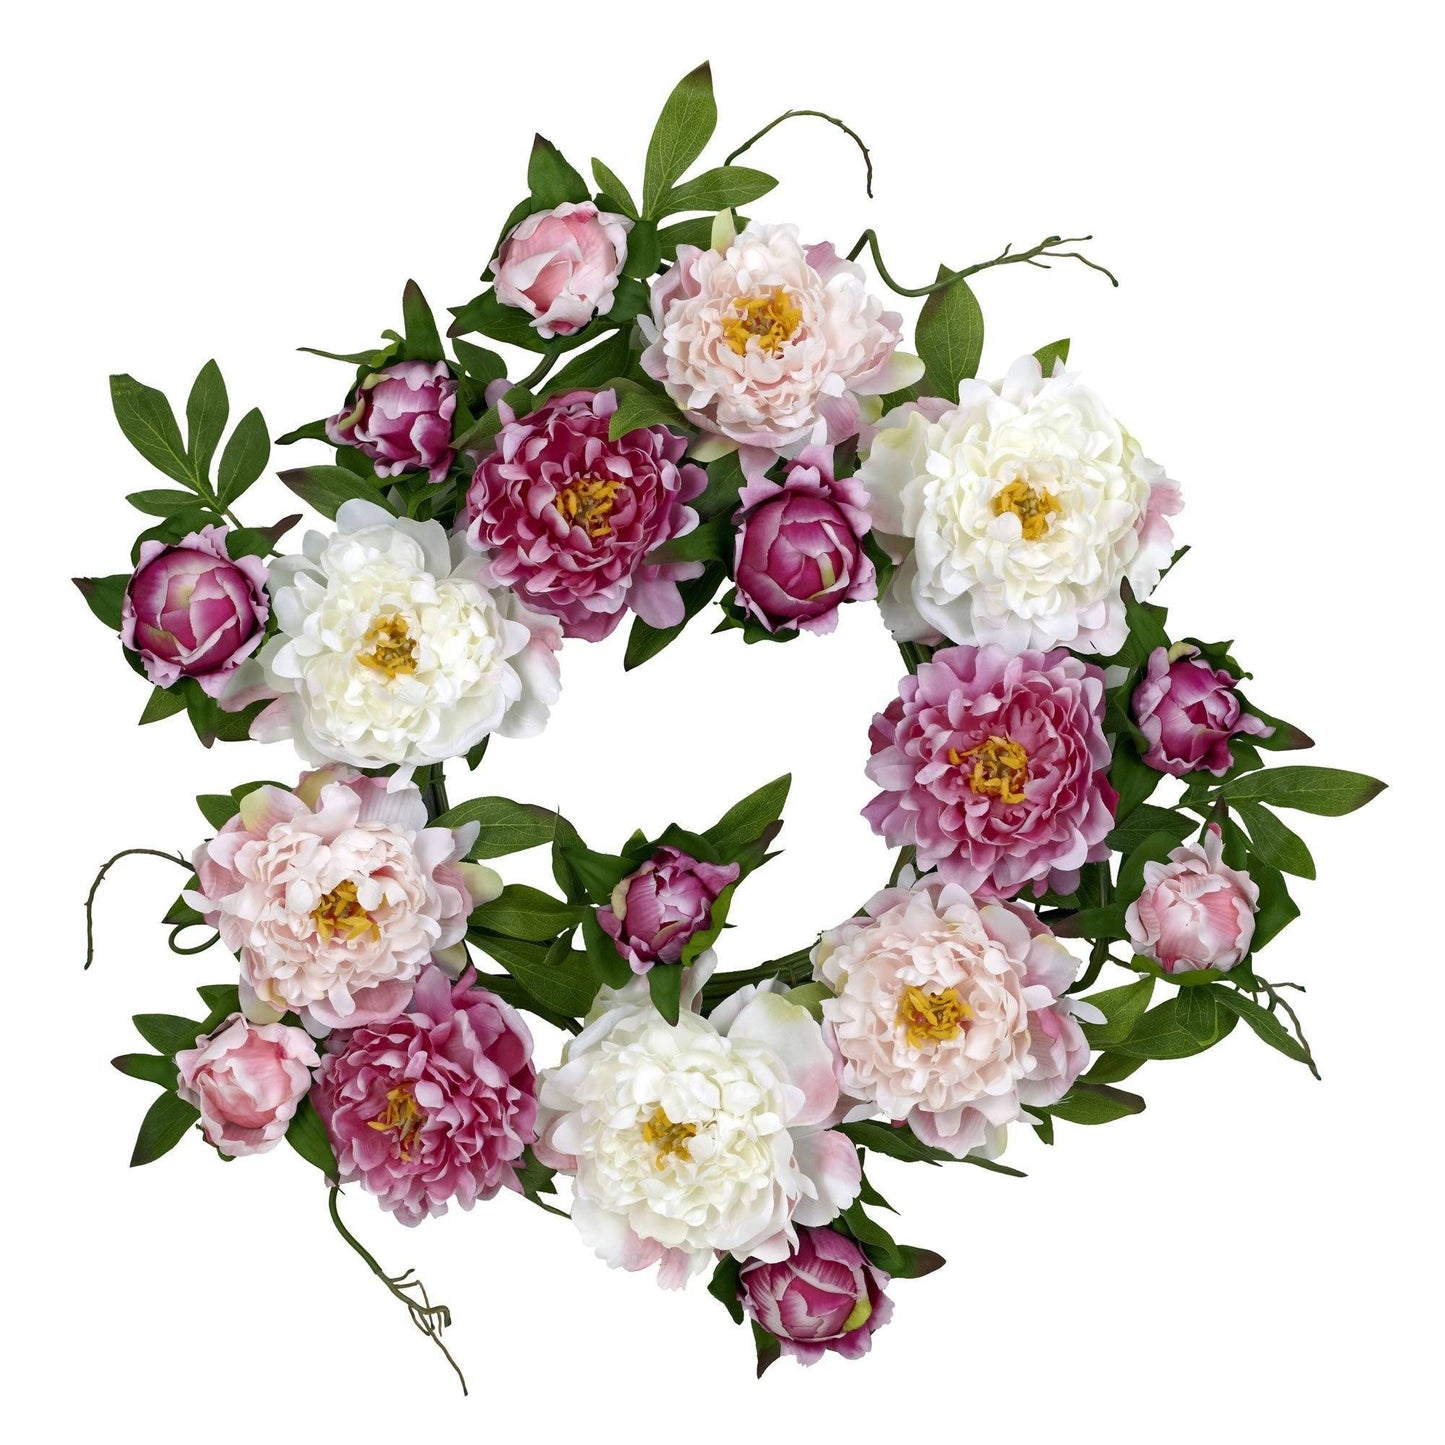 22" Peony Wreath" by Nearly Natural